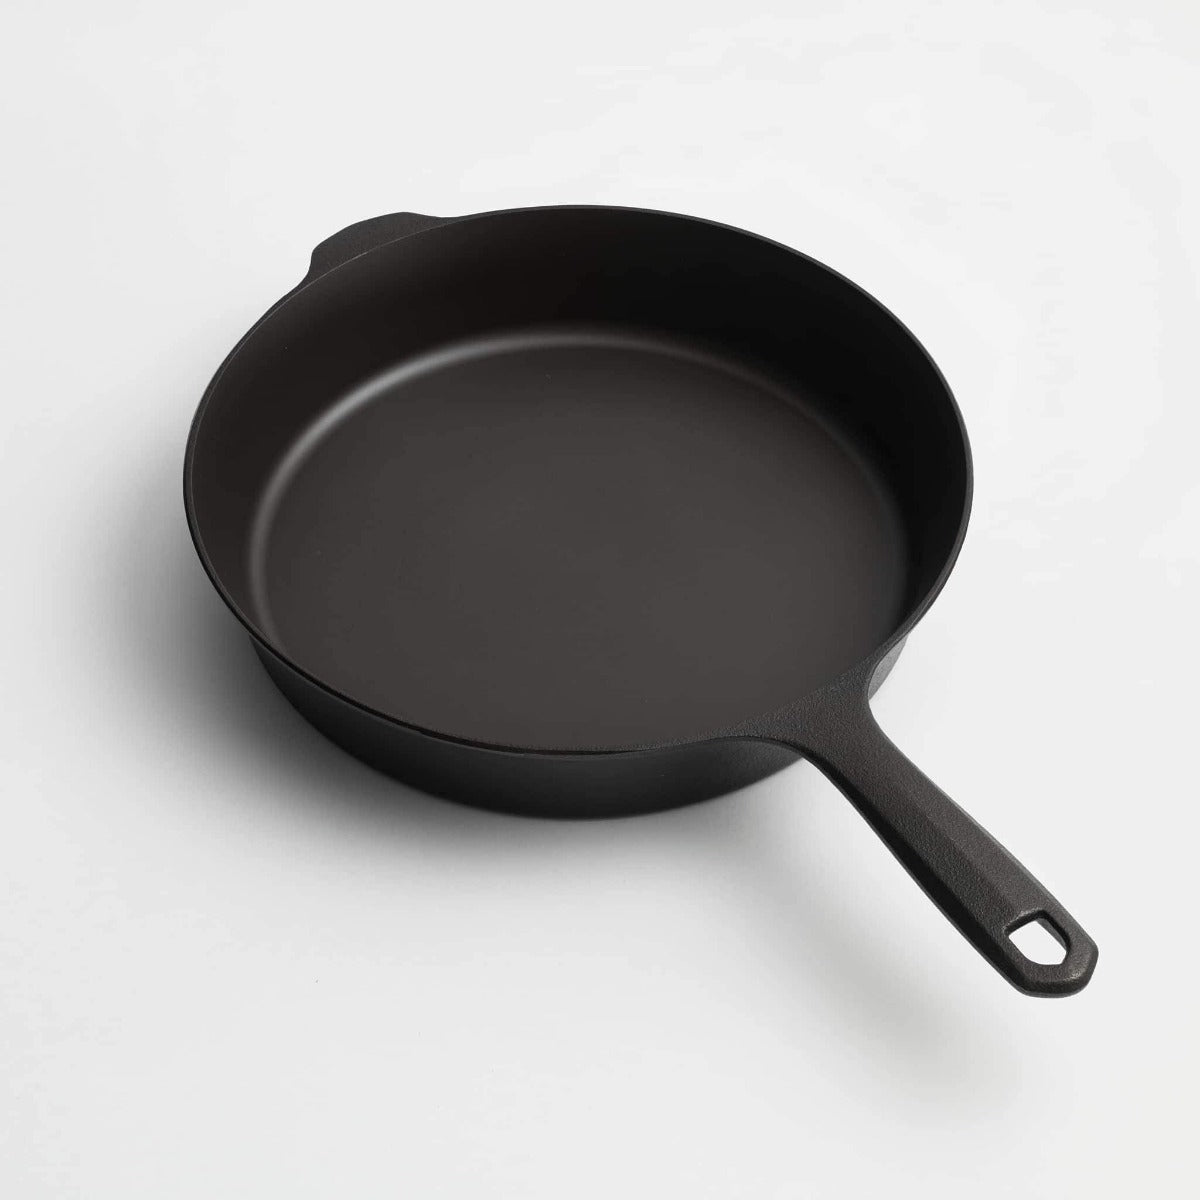 Field Company Cast Iron Skillet Review: a Lightweight Take on a Classic